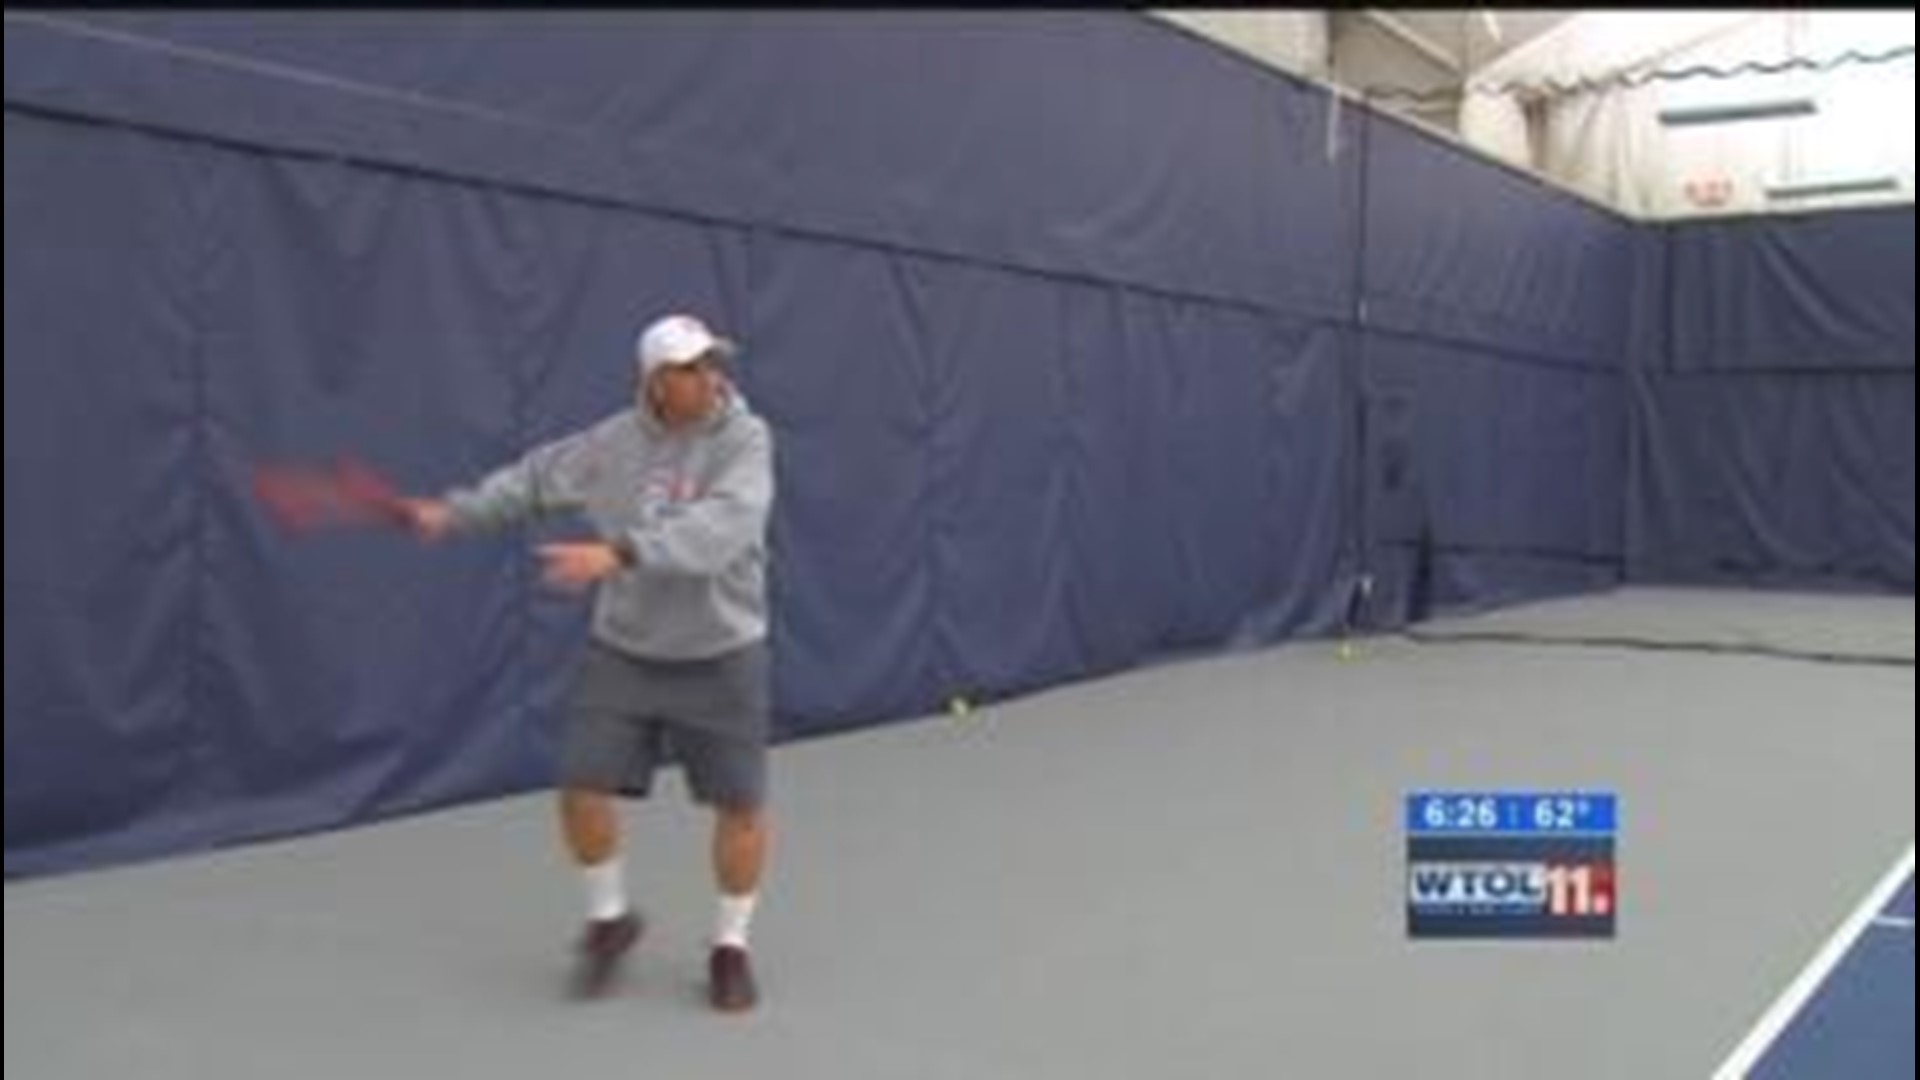 Local tennis coached named Coach of the Year